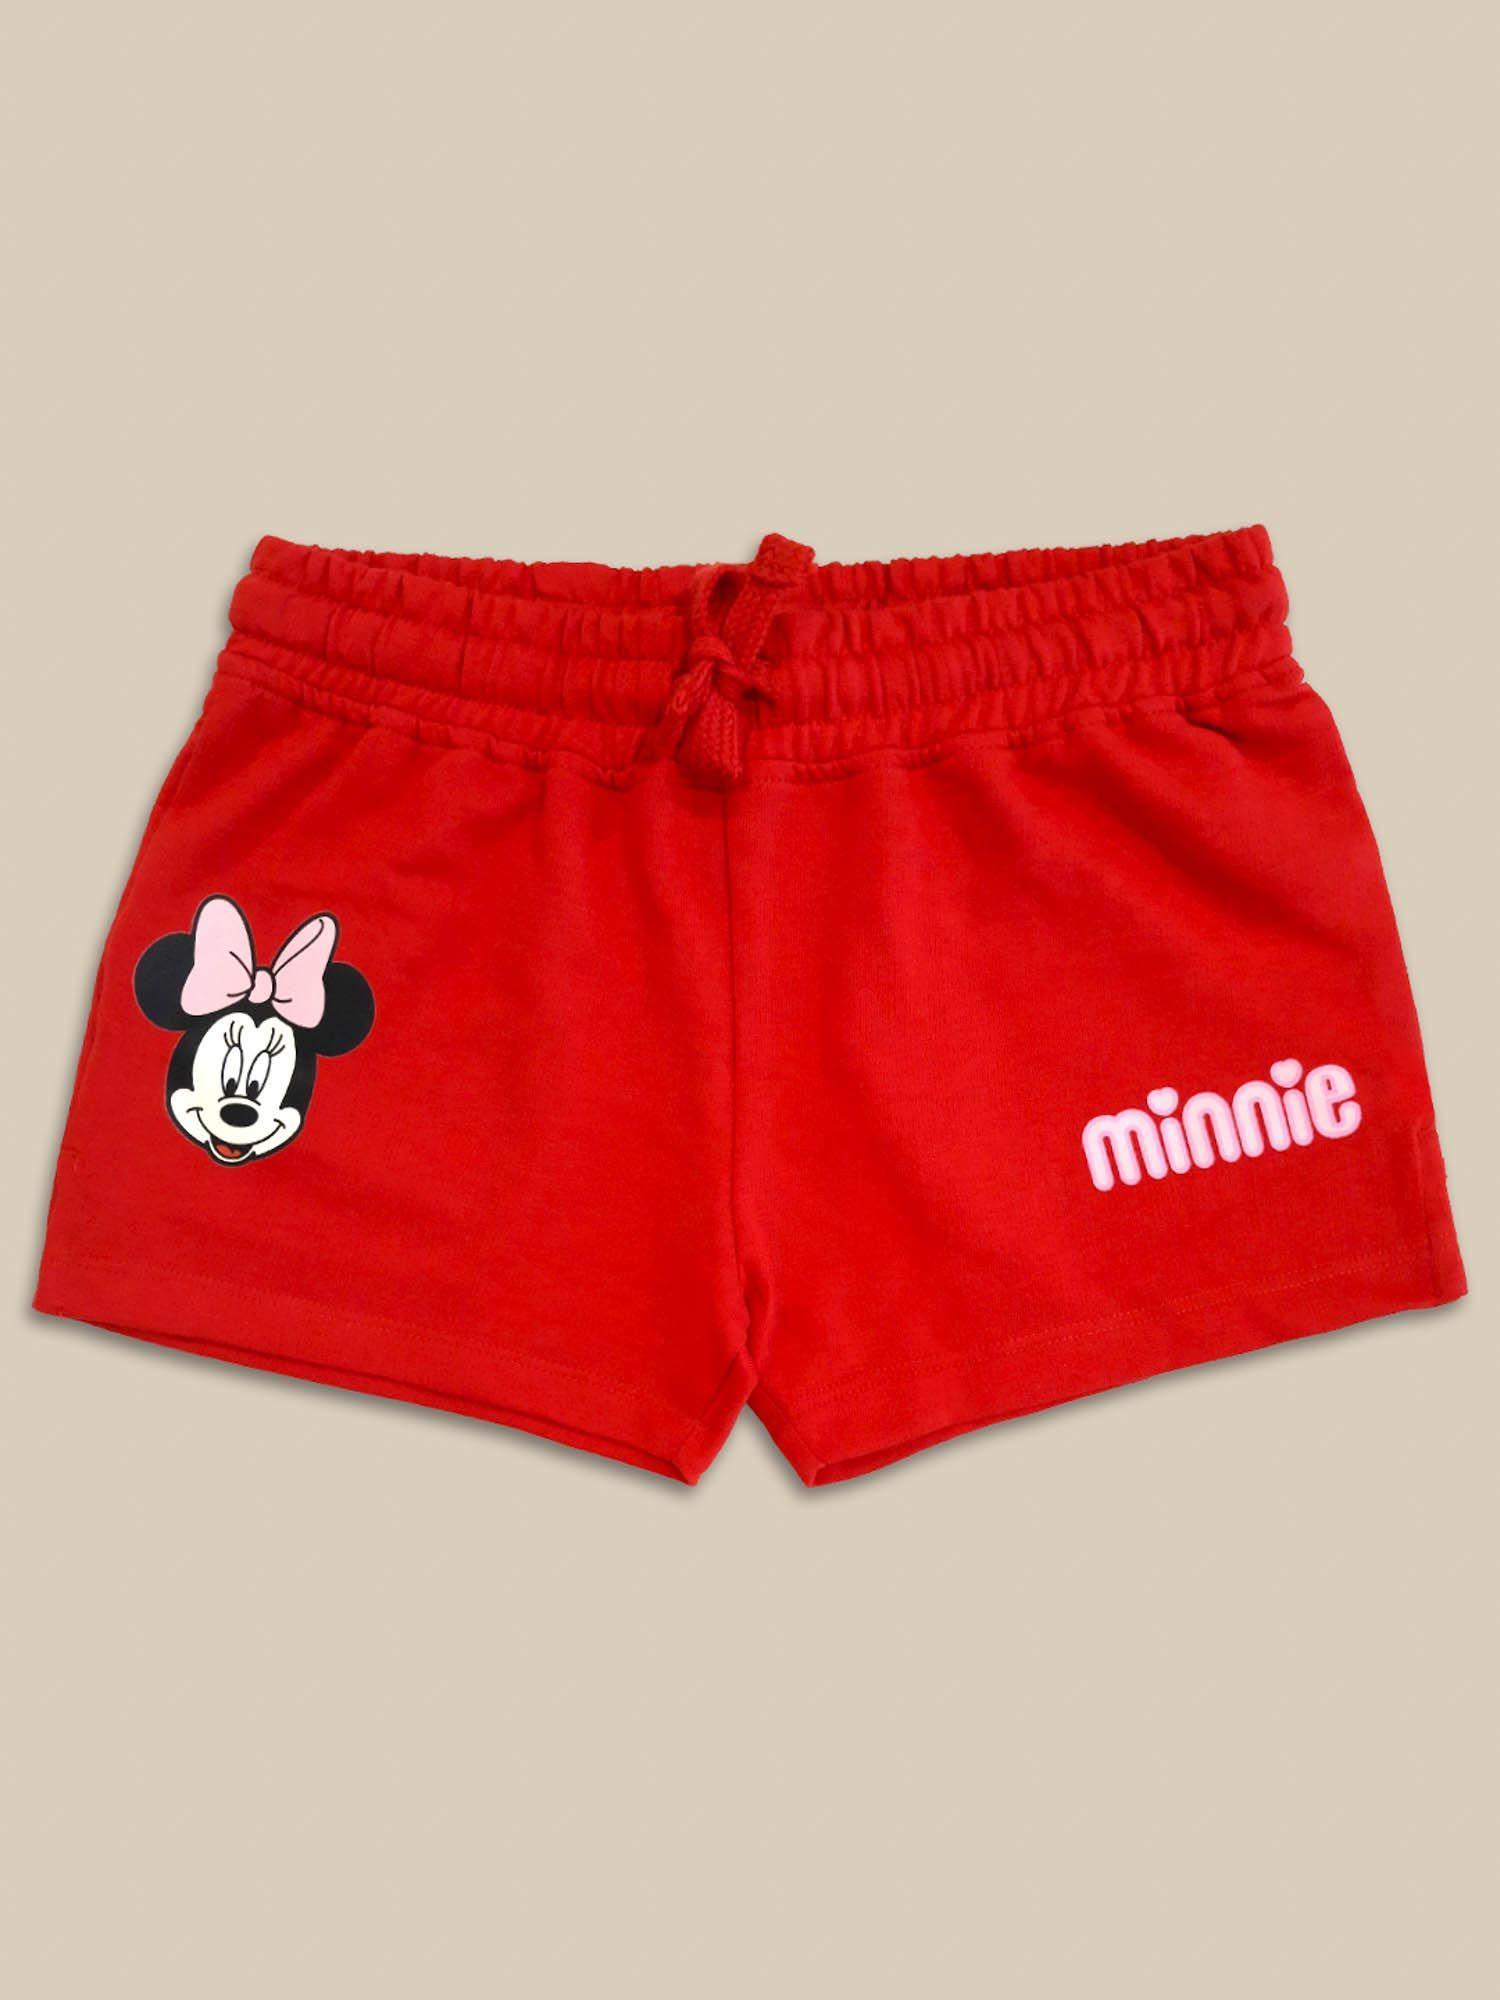 mickey & friends printed red shorts for girls